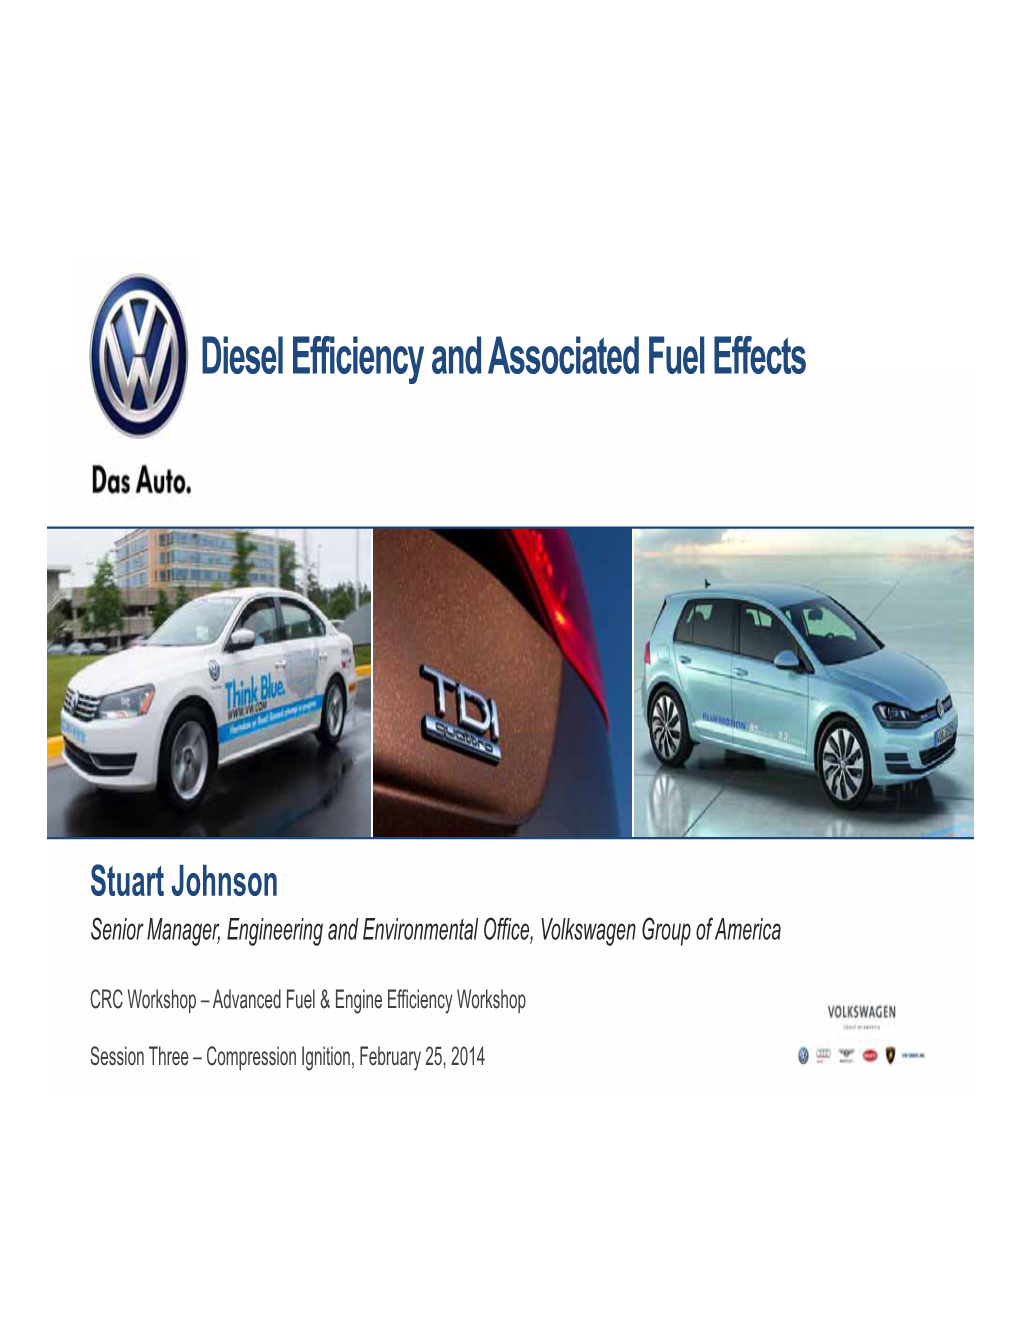 Diesel Efficiency and Associated Fuel Effects